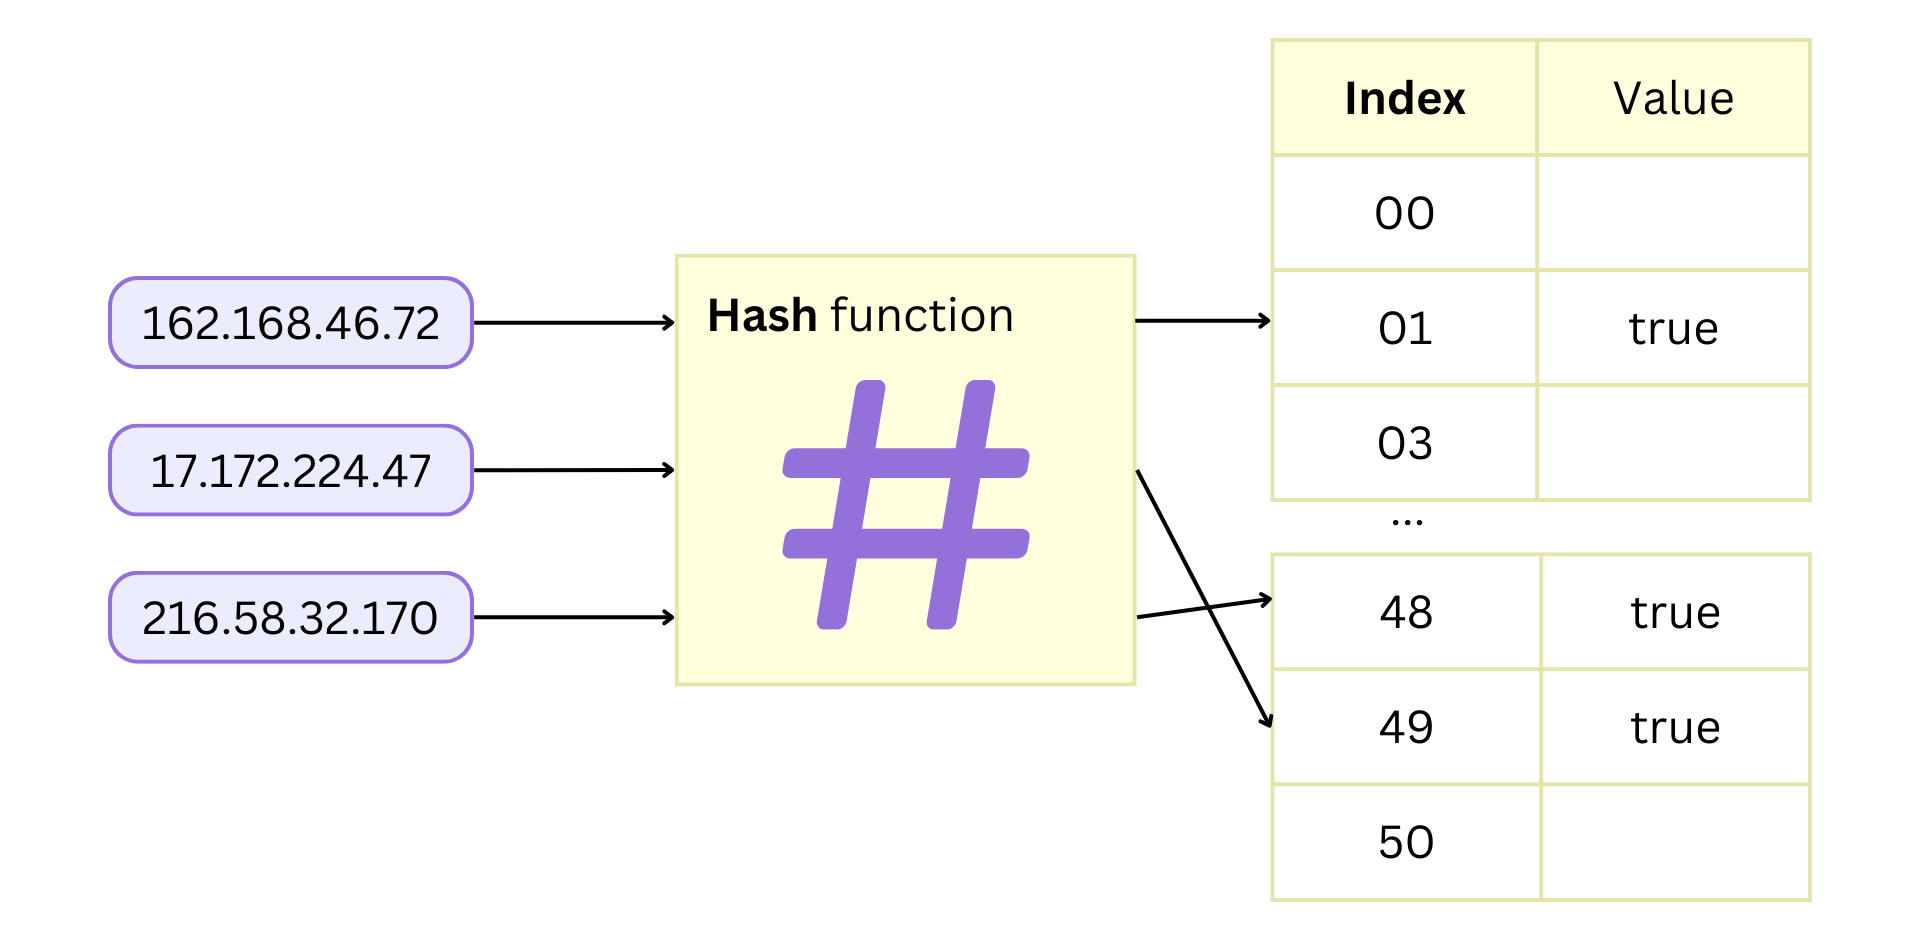 Storing IP addresses in a hash table